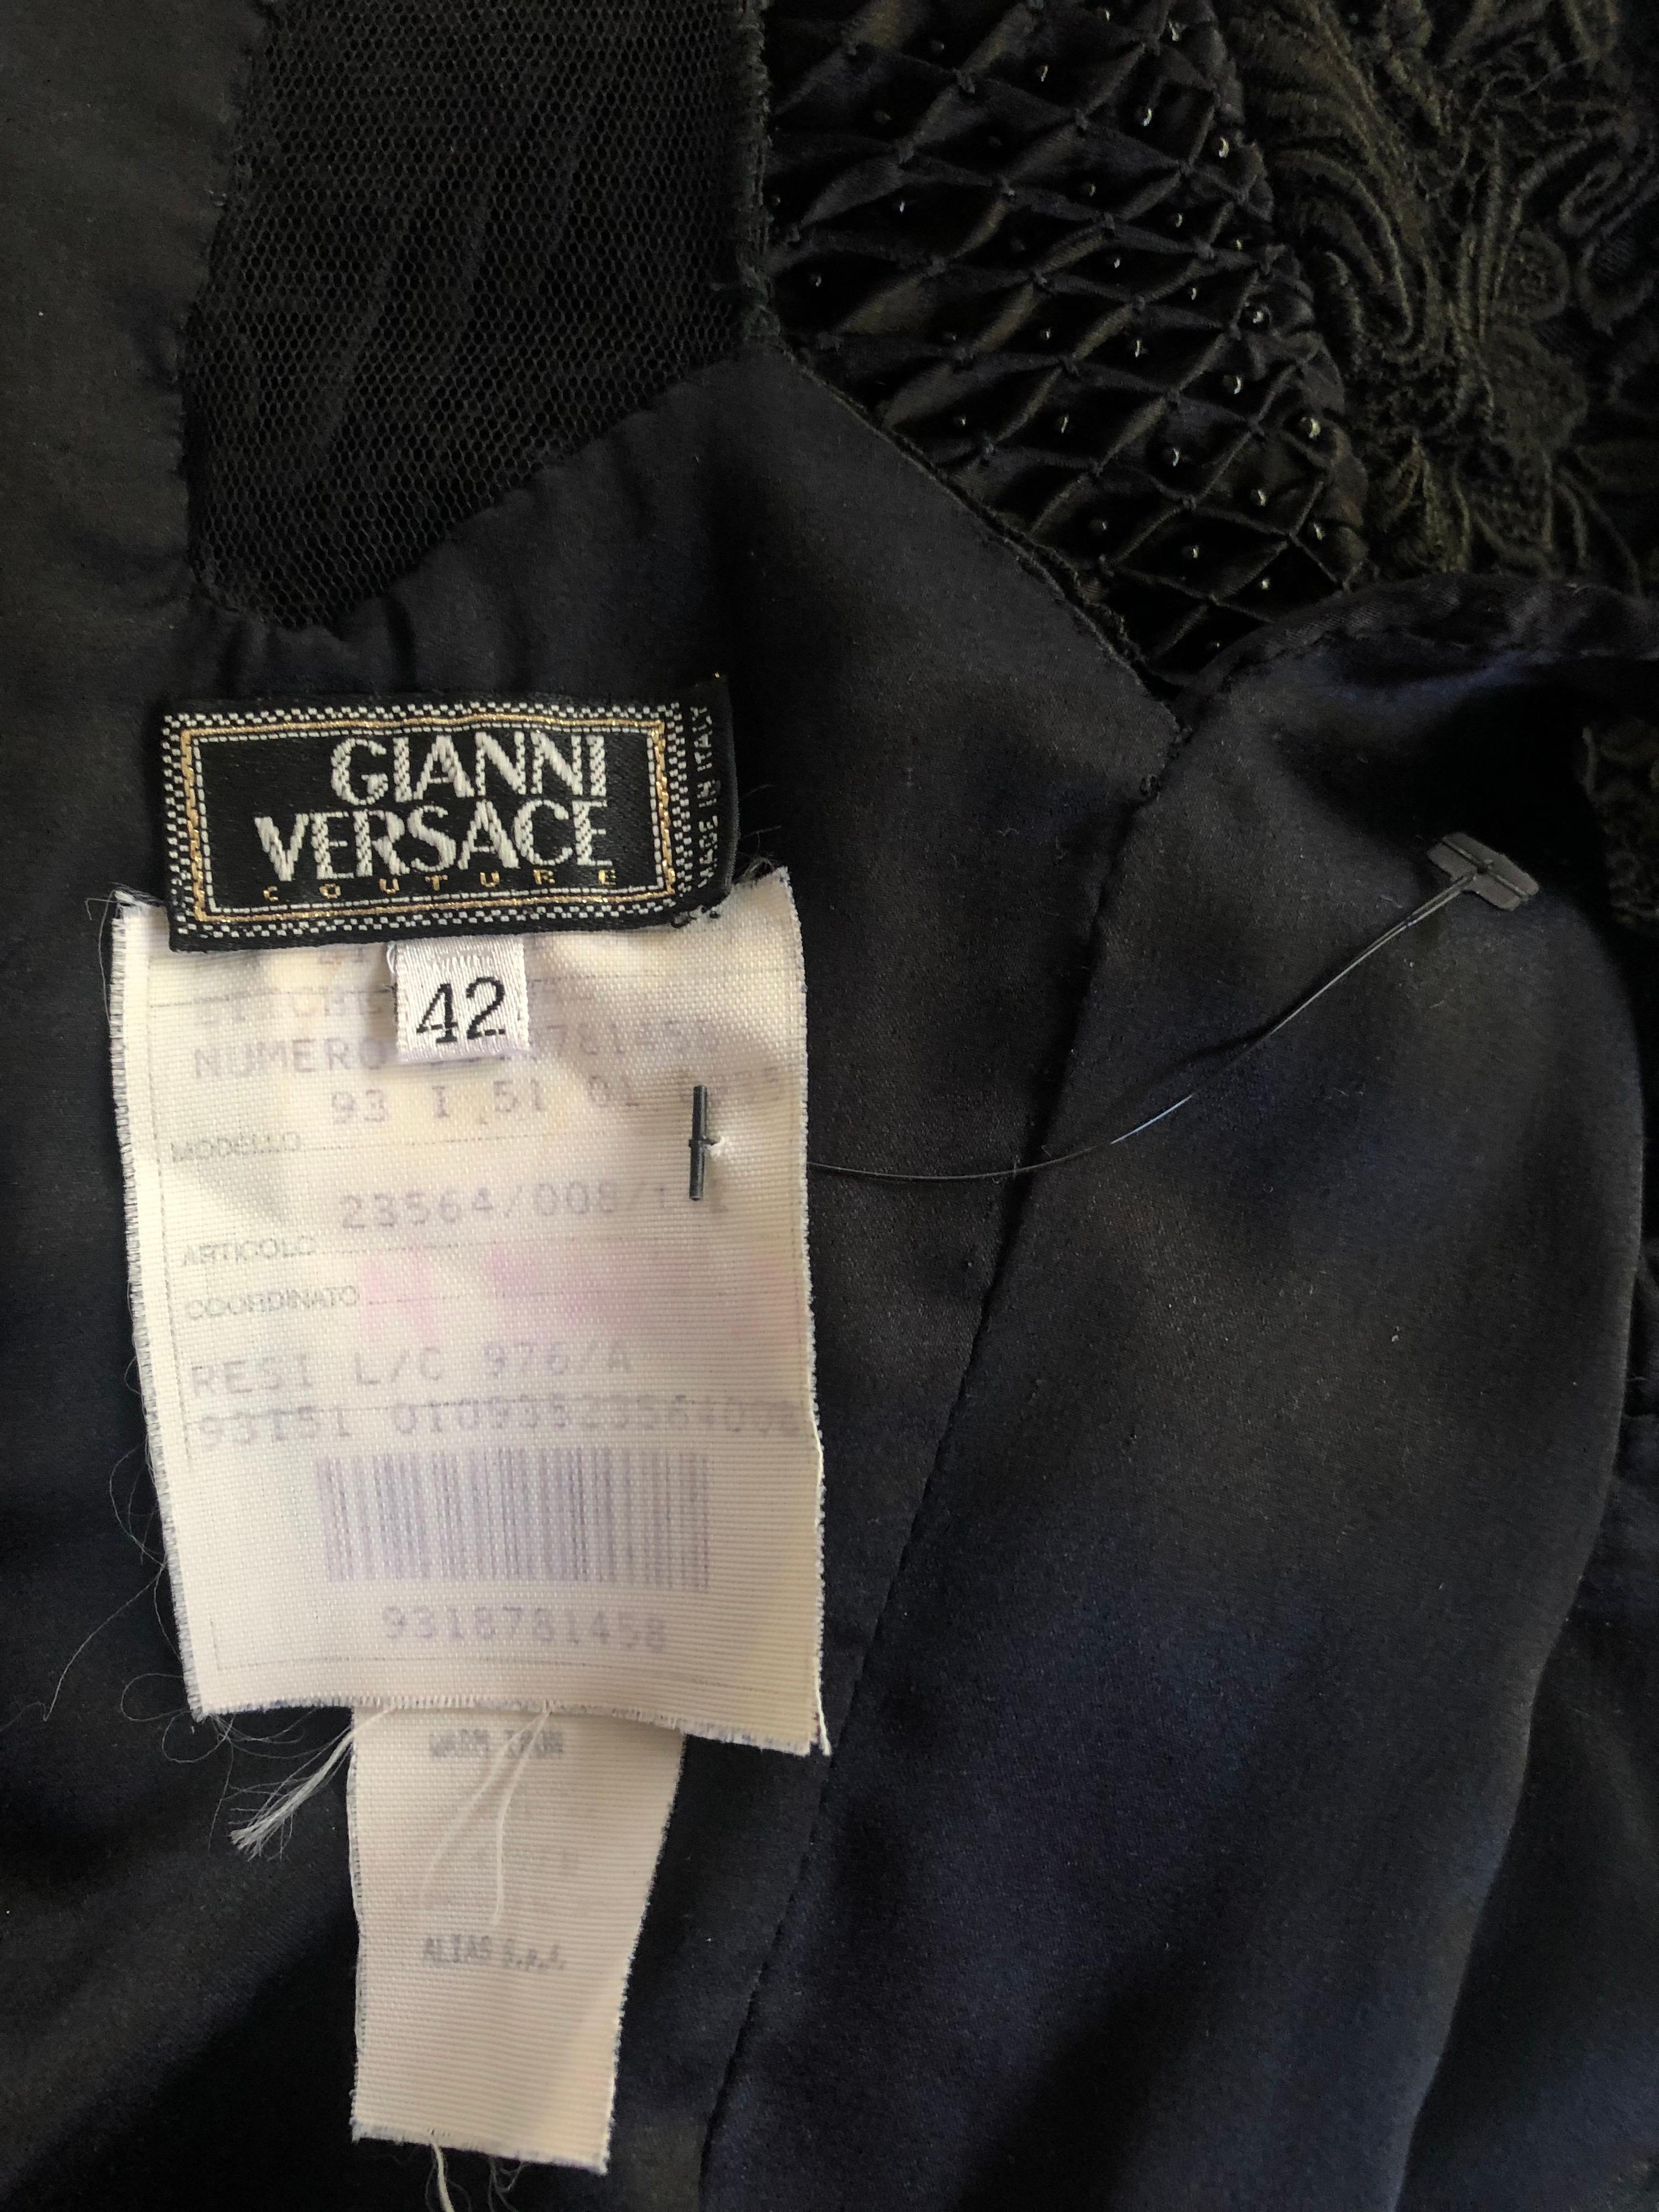 Gianni Versace S/S 1994 Runway Couture Vintage Crinkle Silk Lace Black Dress For Sale 3